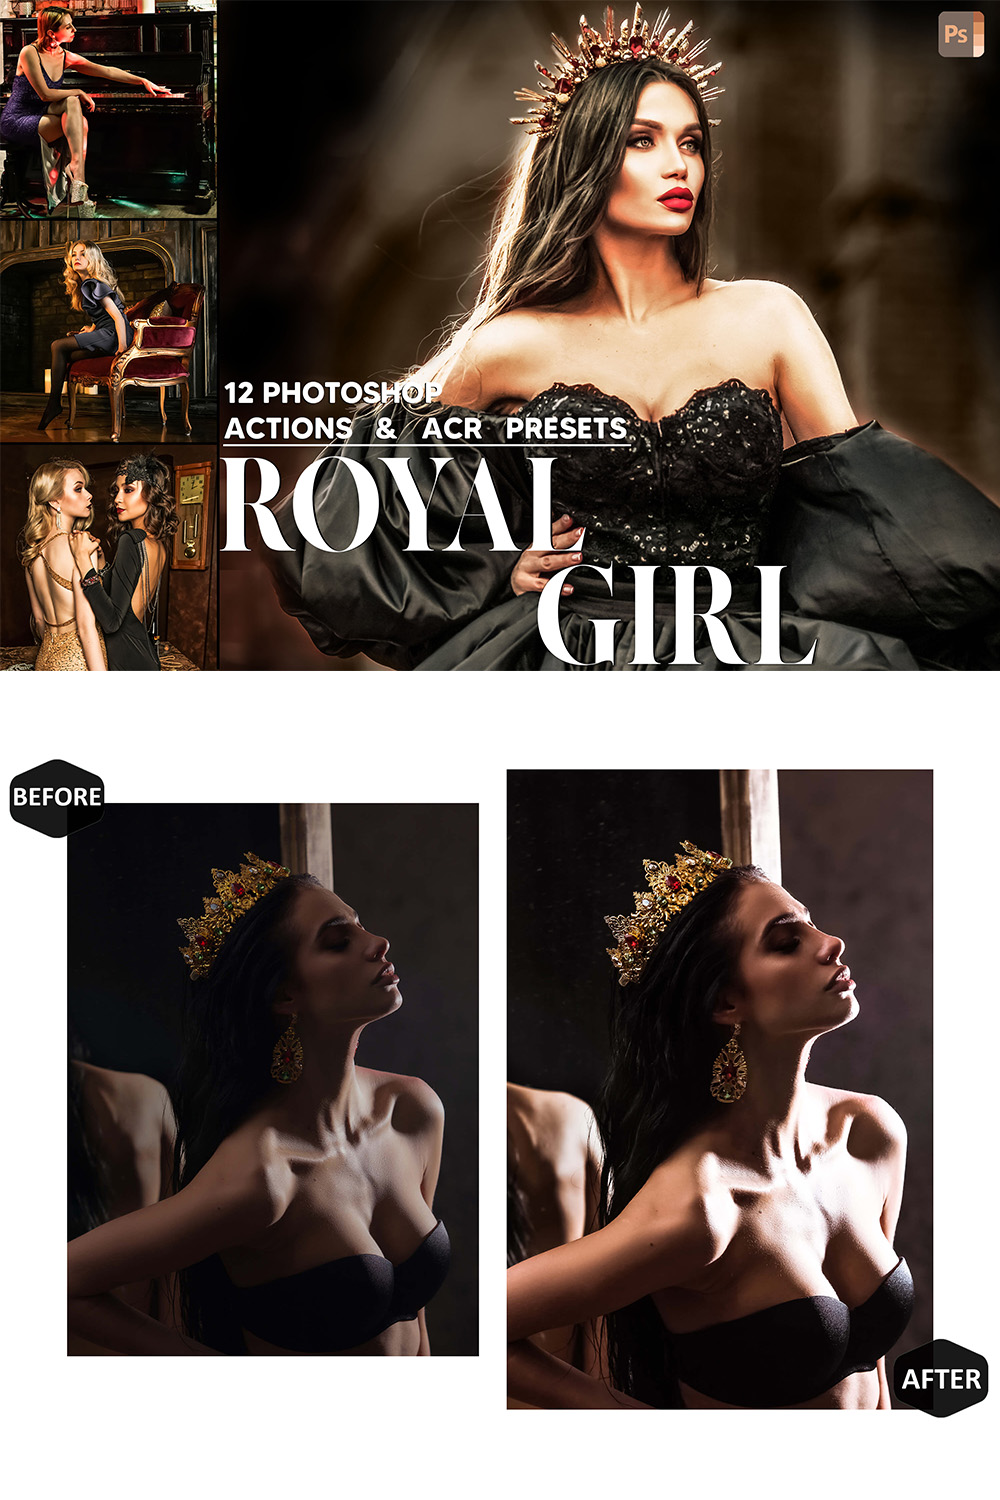 12 Photoshop Actions, Royal Girl Ps Action, Moody ACR Preset, Cool Dark Ps Filter, Atn Pictures And style Theme For Instagram, Blogger pinterest preview image.